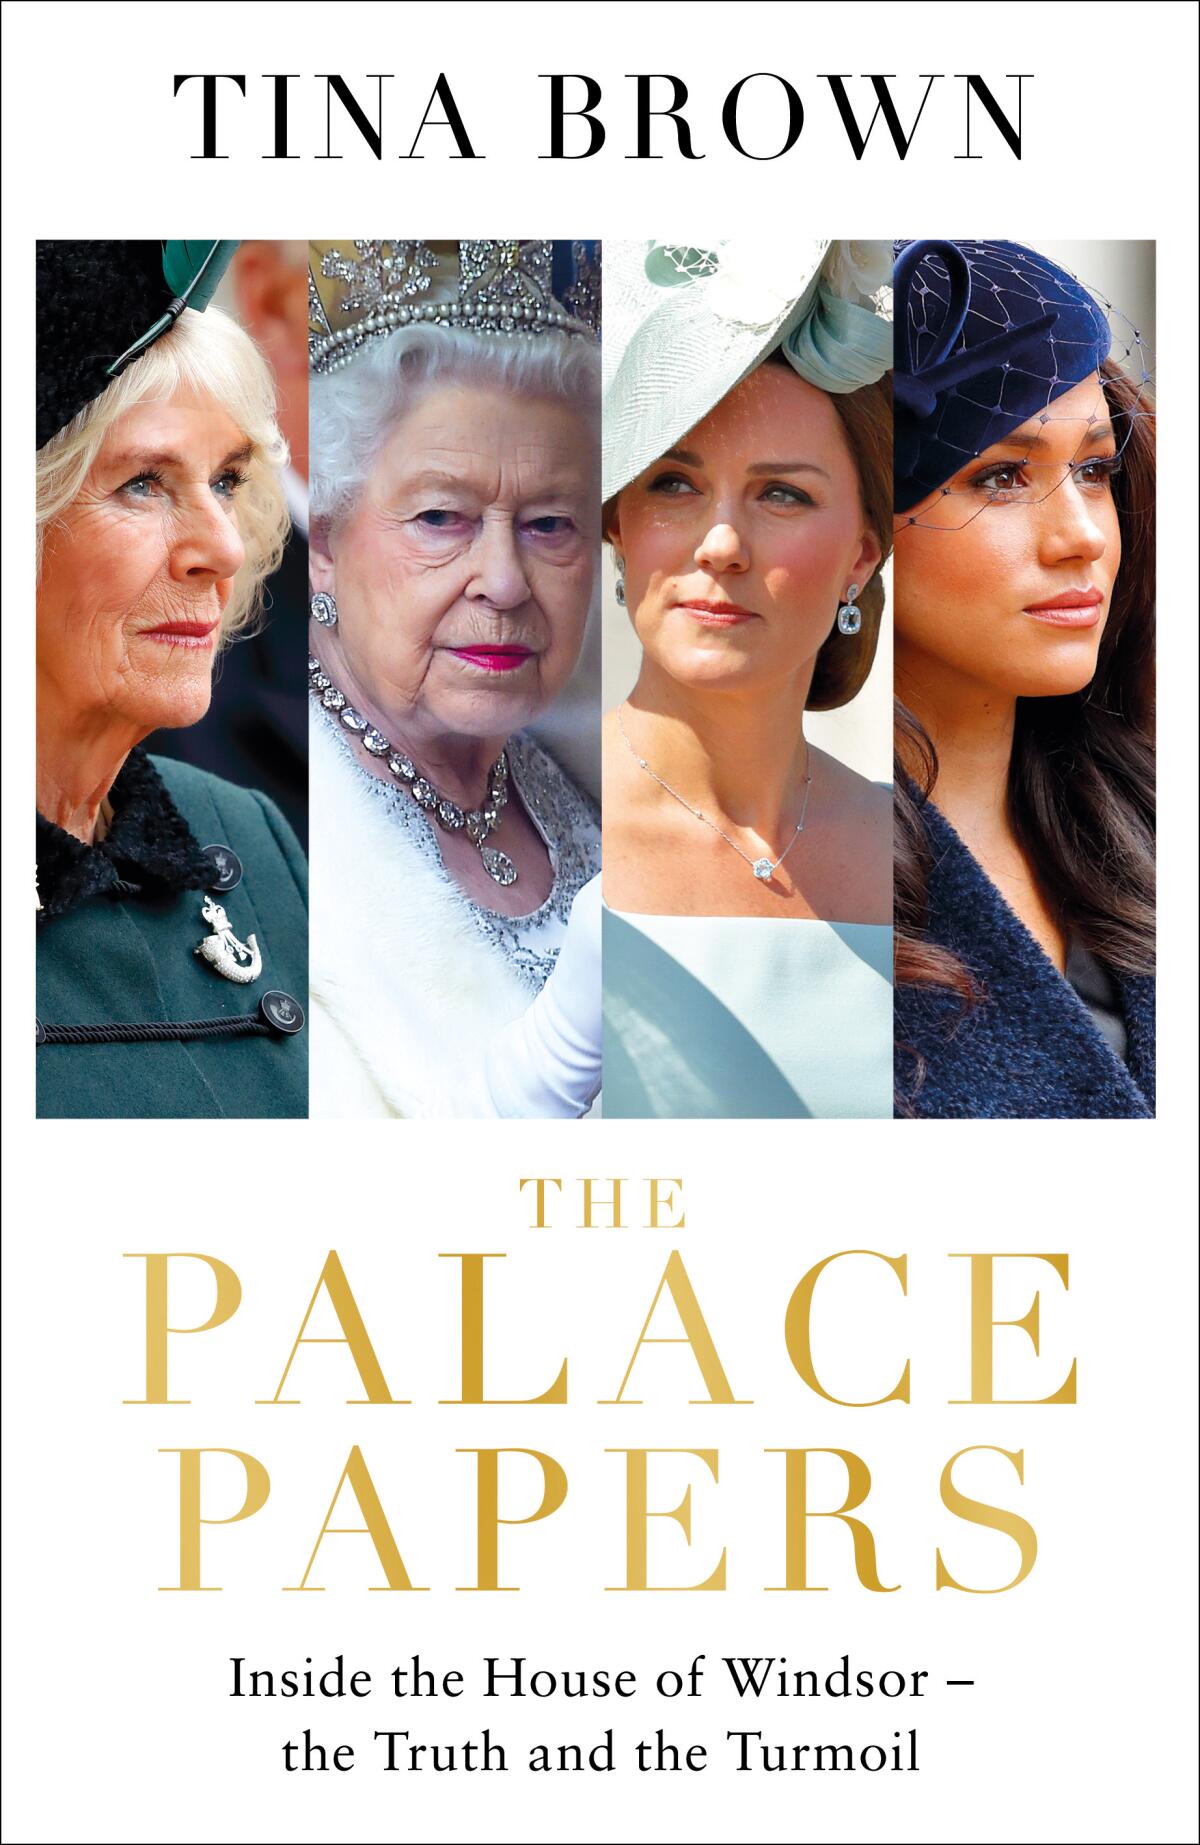 The cover of "The Palace Papers" by Tina Brown